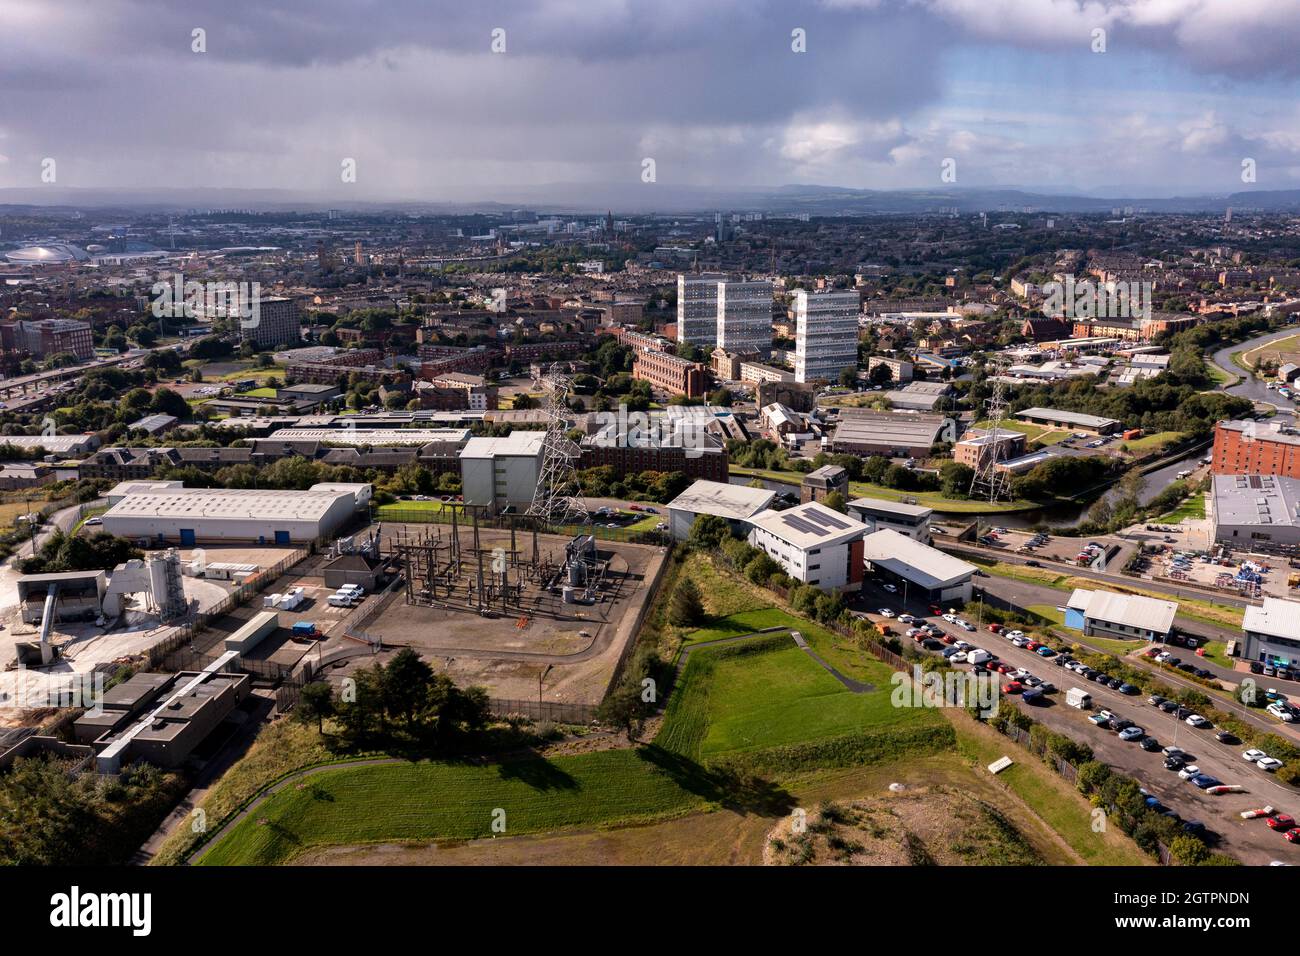 Glasgow, Scotland, UK. 29 September 2021 PICTURED: Looking over to the back  of Speirs Wharf and beyond with the high flats of Maryhill. Aerial drone  view of Glasgow's Sighthill area showing the